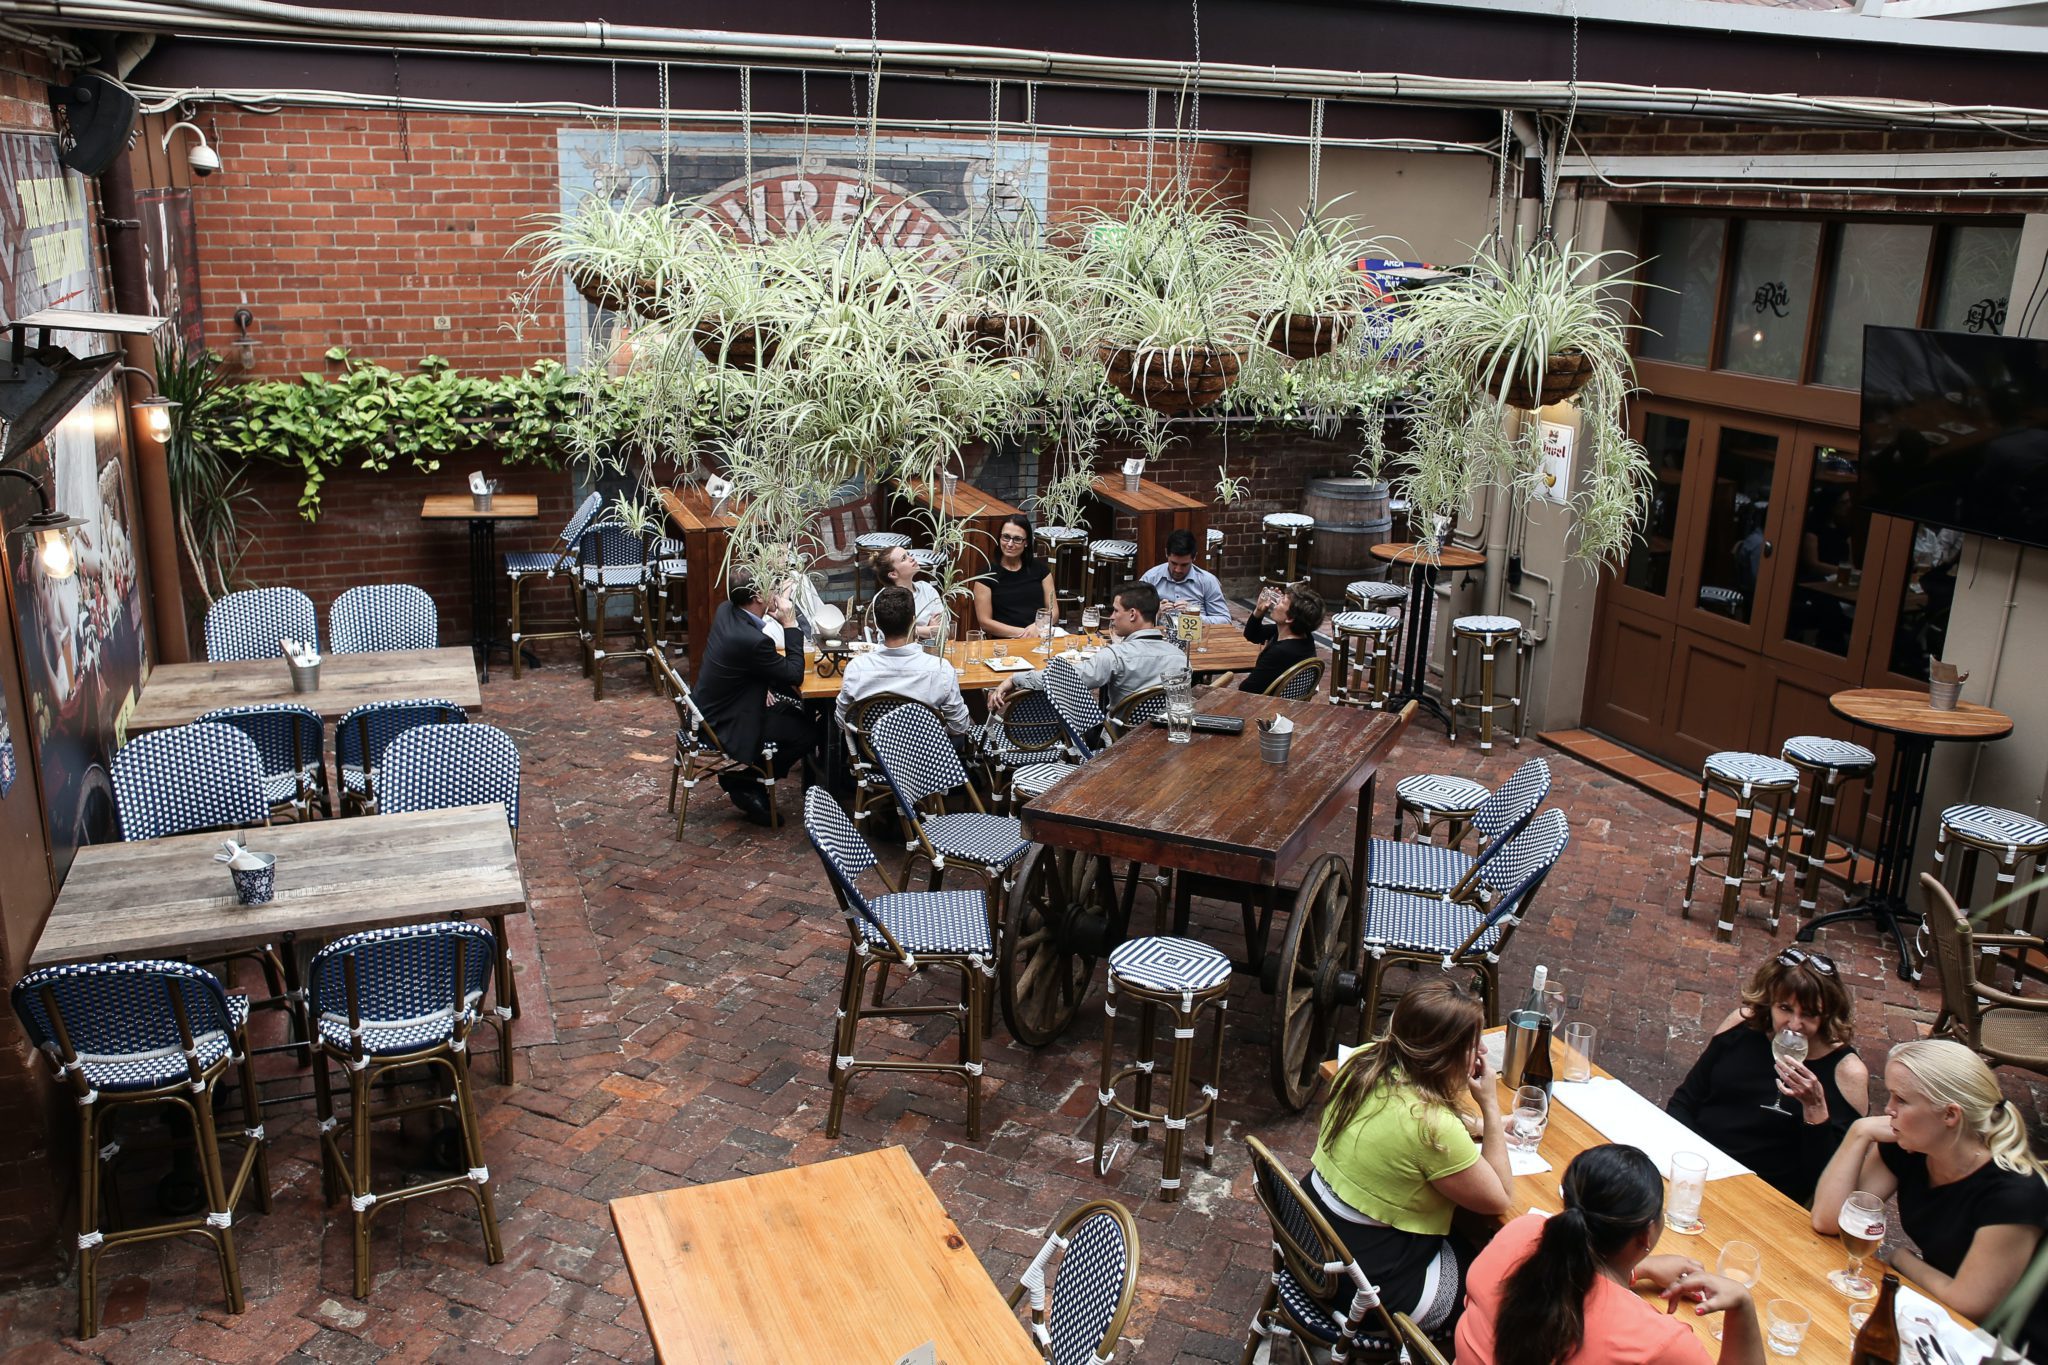 a small restaurant patio view from above. Tables and chairs, and hanging greenery